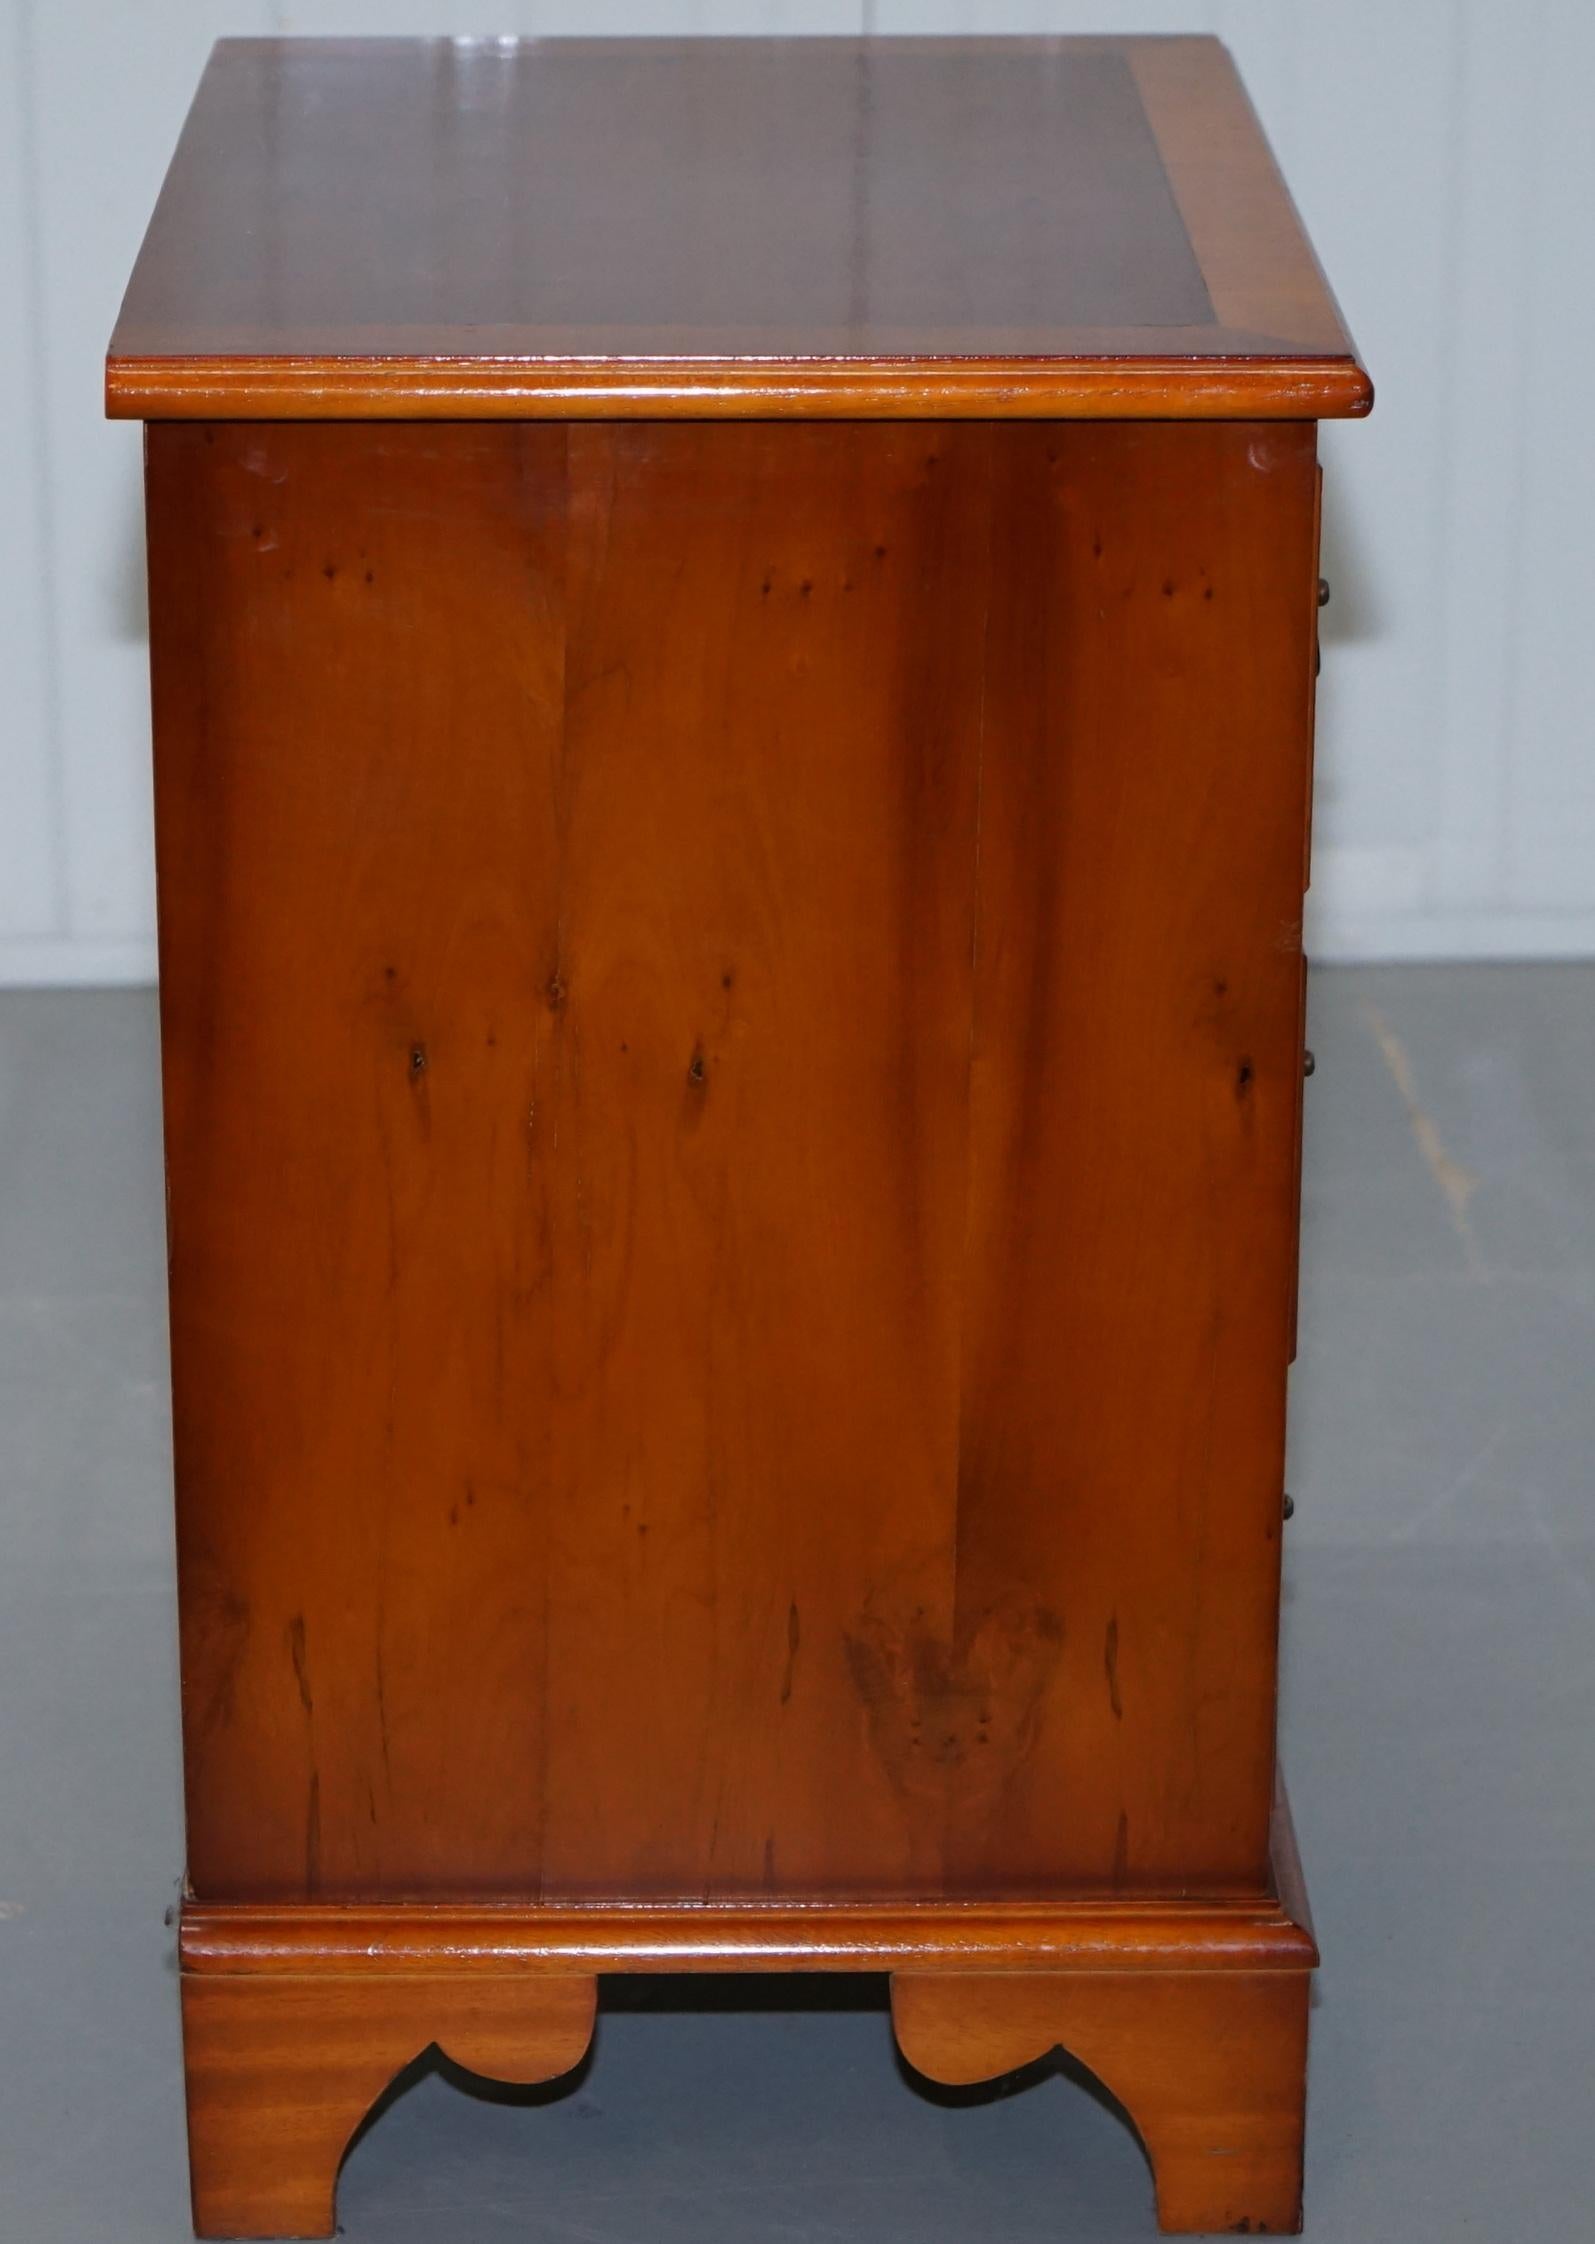 Small Burr Yew Wood Side Table Sized Chest of Drawers Great for Office Home Bed 3